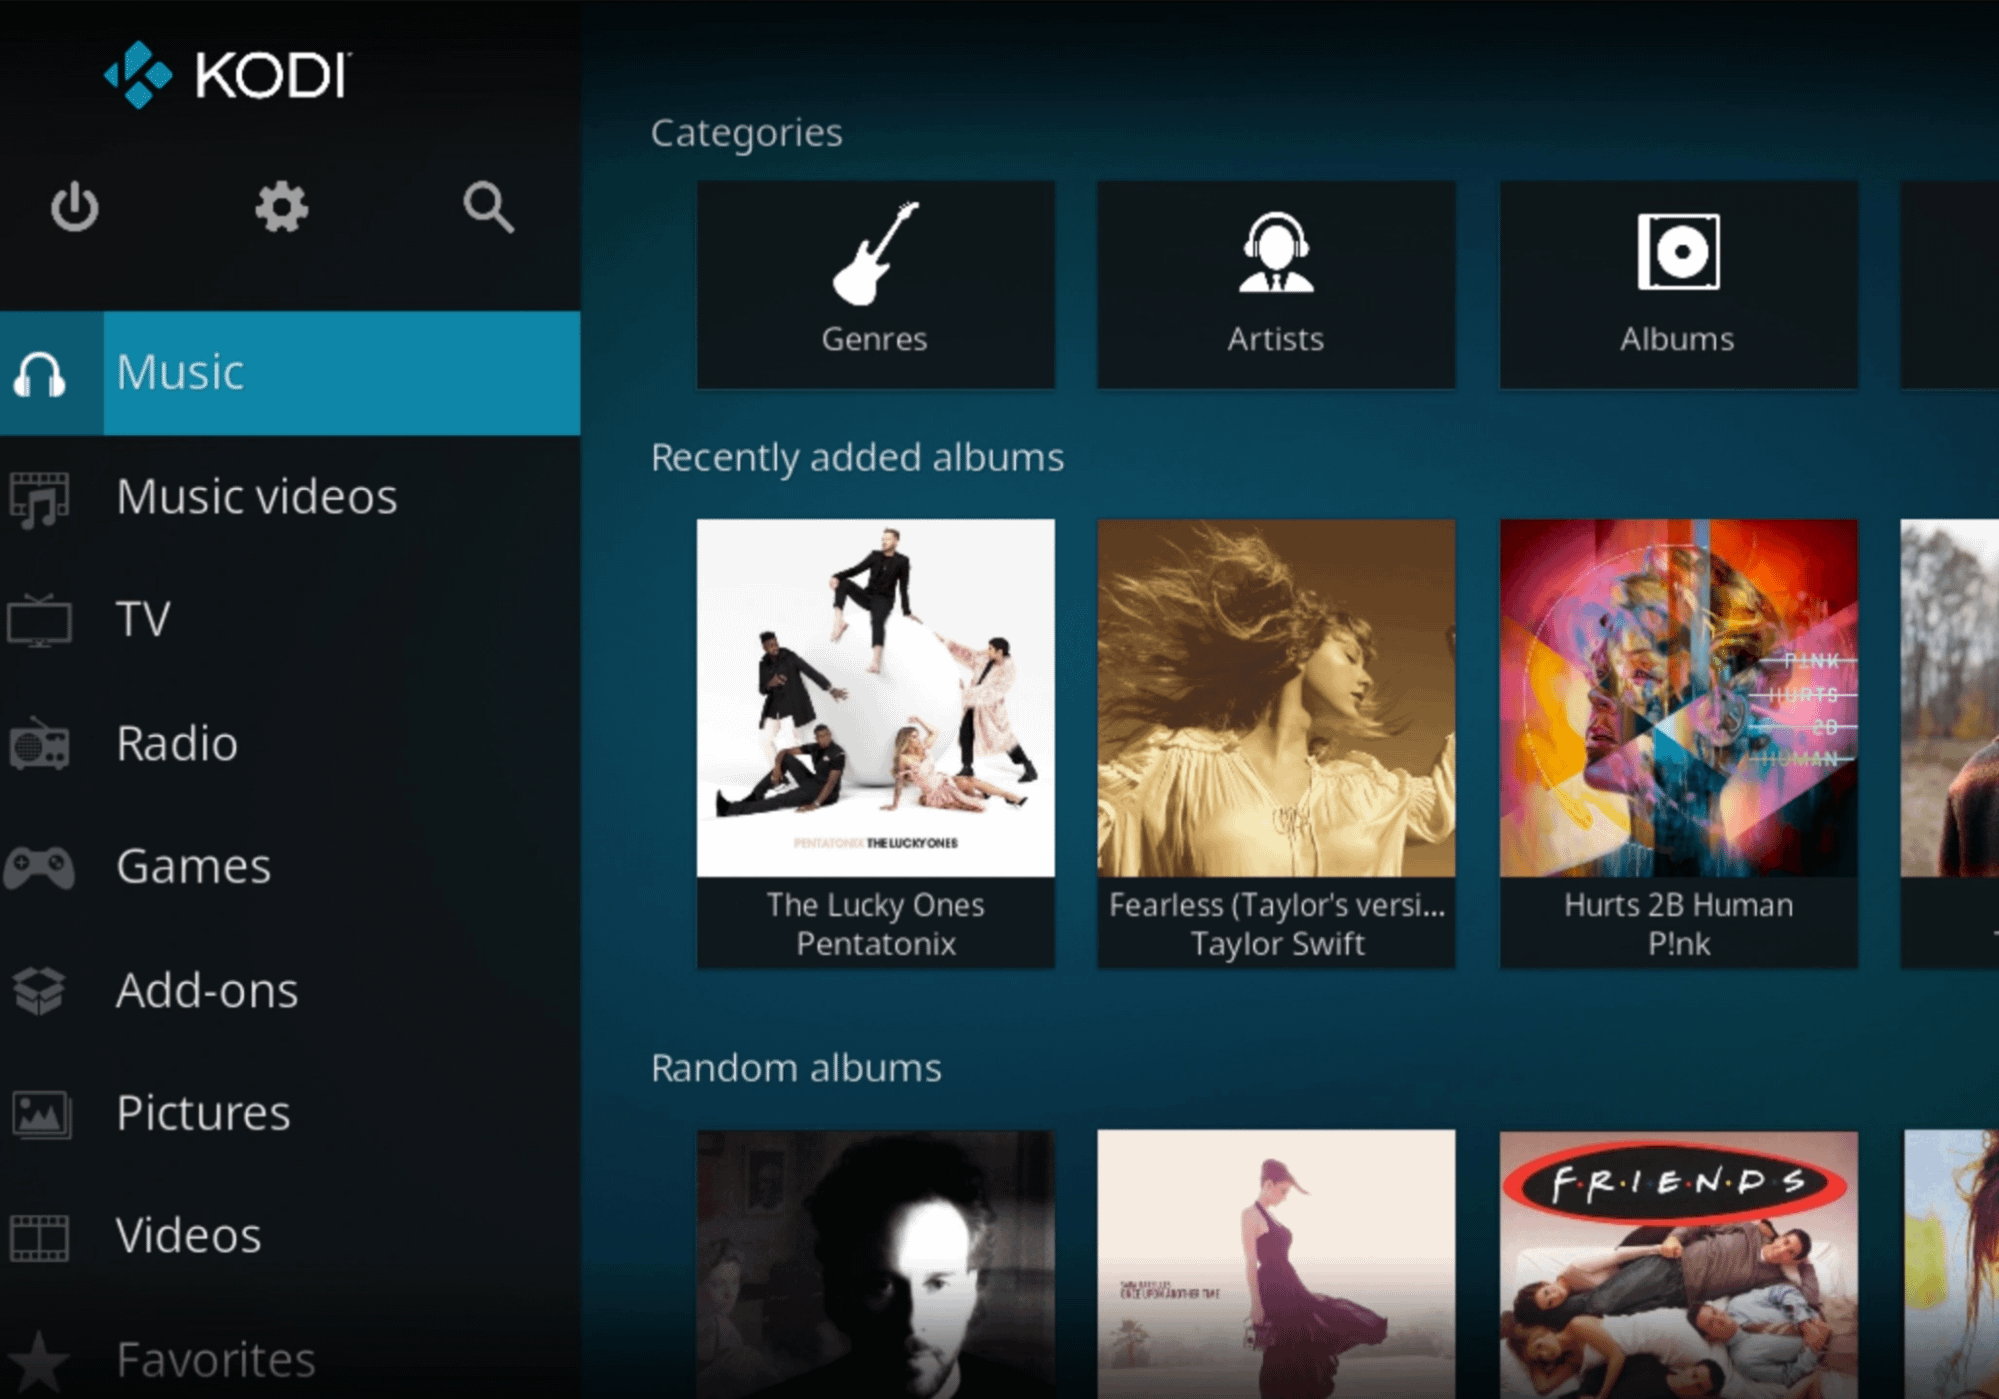 Kodi home screen showing categories, recently added albums and random albums in the music section of the app.